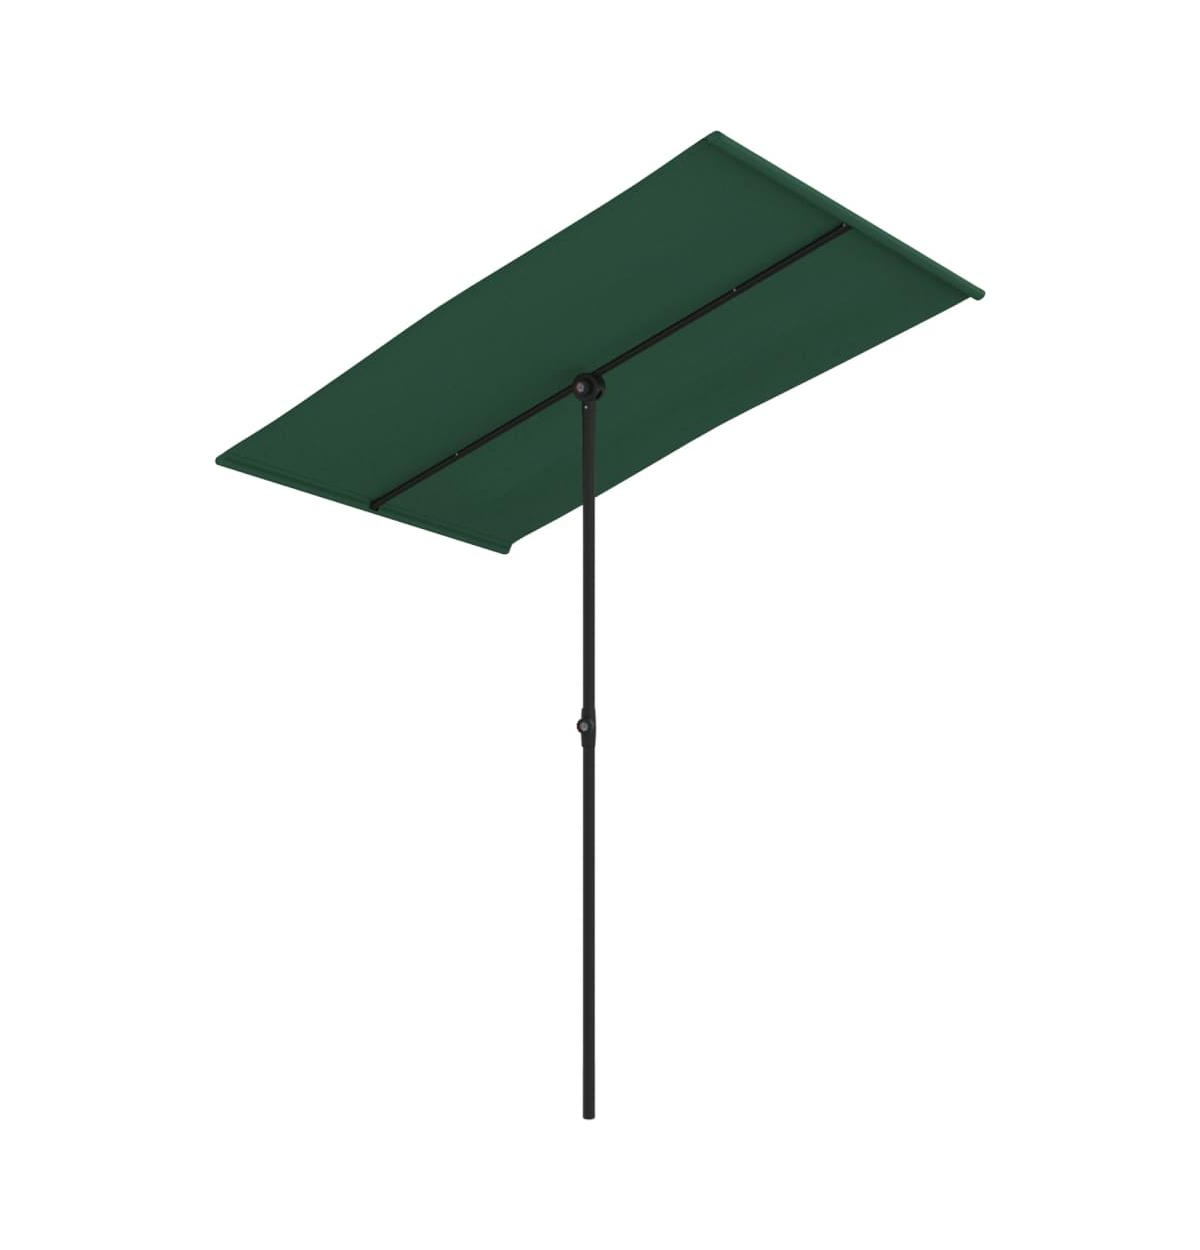 Outdoor Parasol with Aluminum Pole 70.9"x43.3" Green - Green